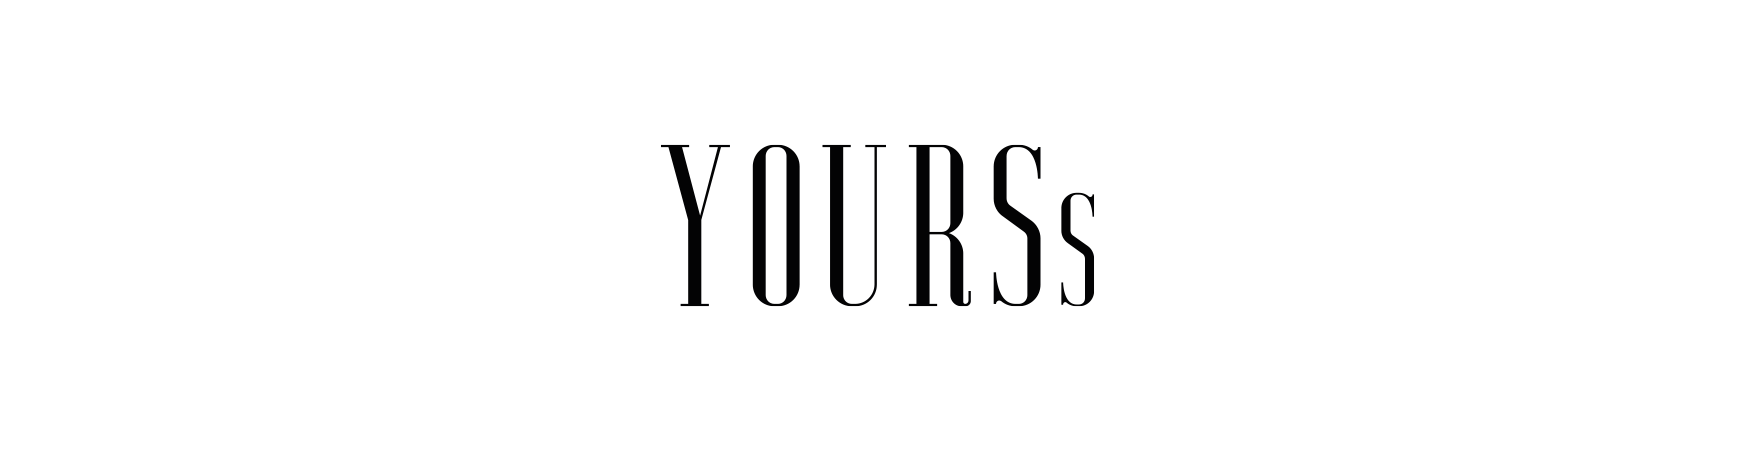 YOURs